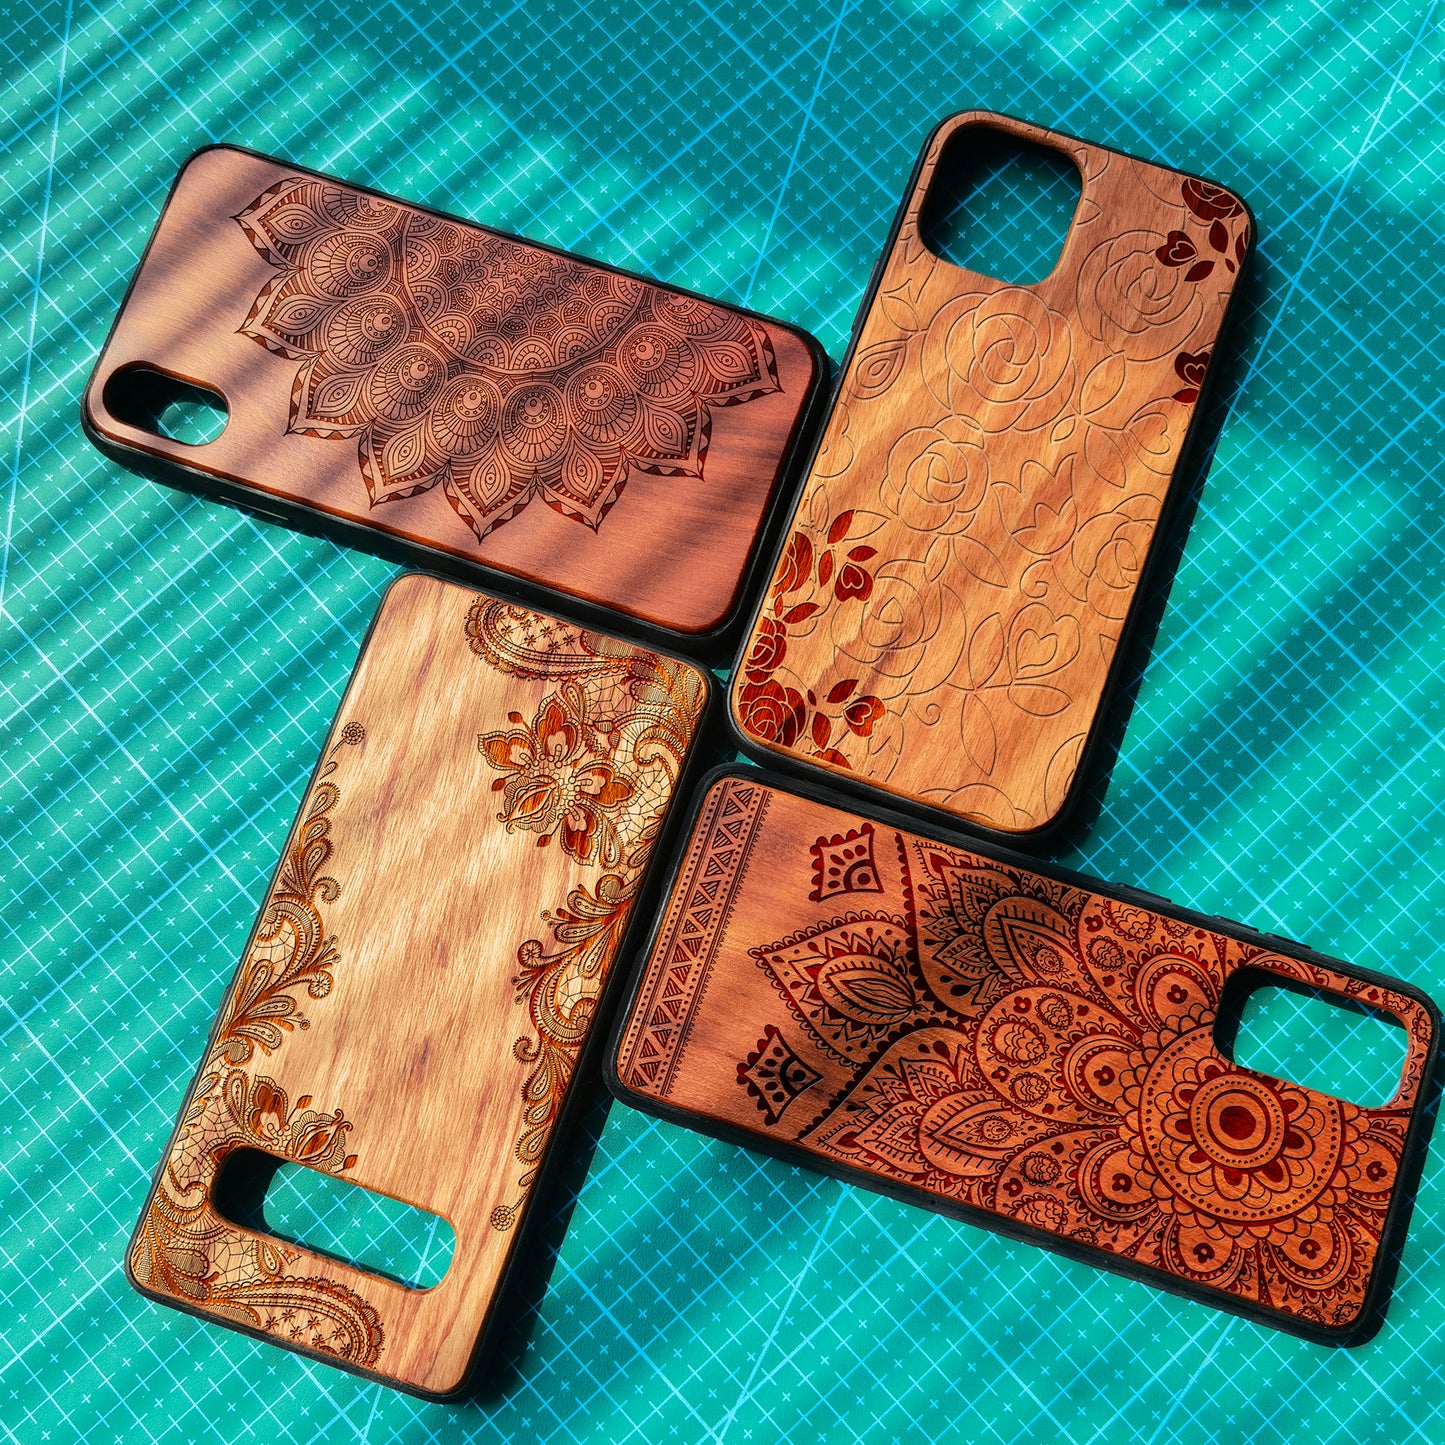 Engravable Mandala Wooden Phone Case For iPhone 11/12/13 Pro Max,iPhone Xs Max Xr 7/8 Plus,Samsung Galaxy S8/S9/S10/S20/S21/S22 Plus,Note 10/20